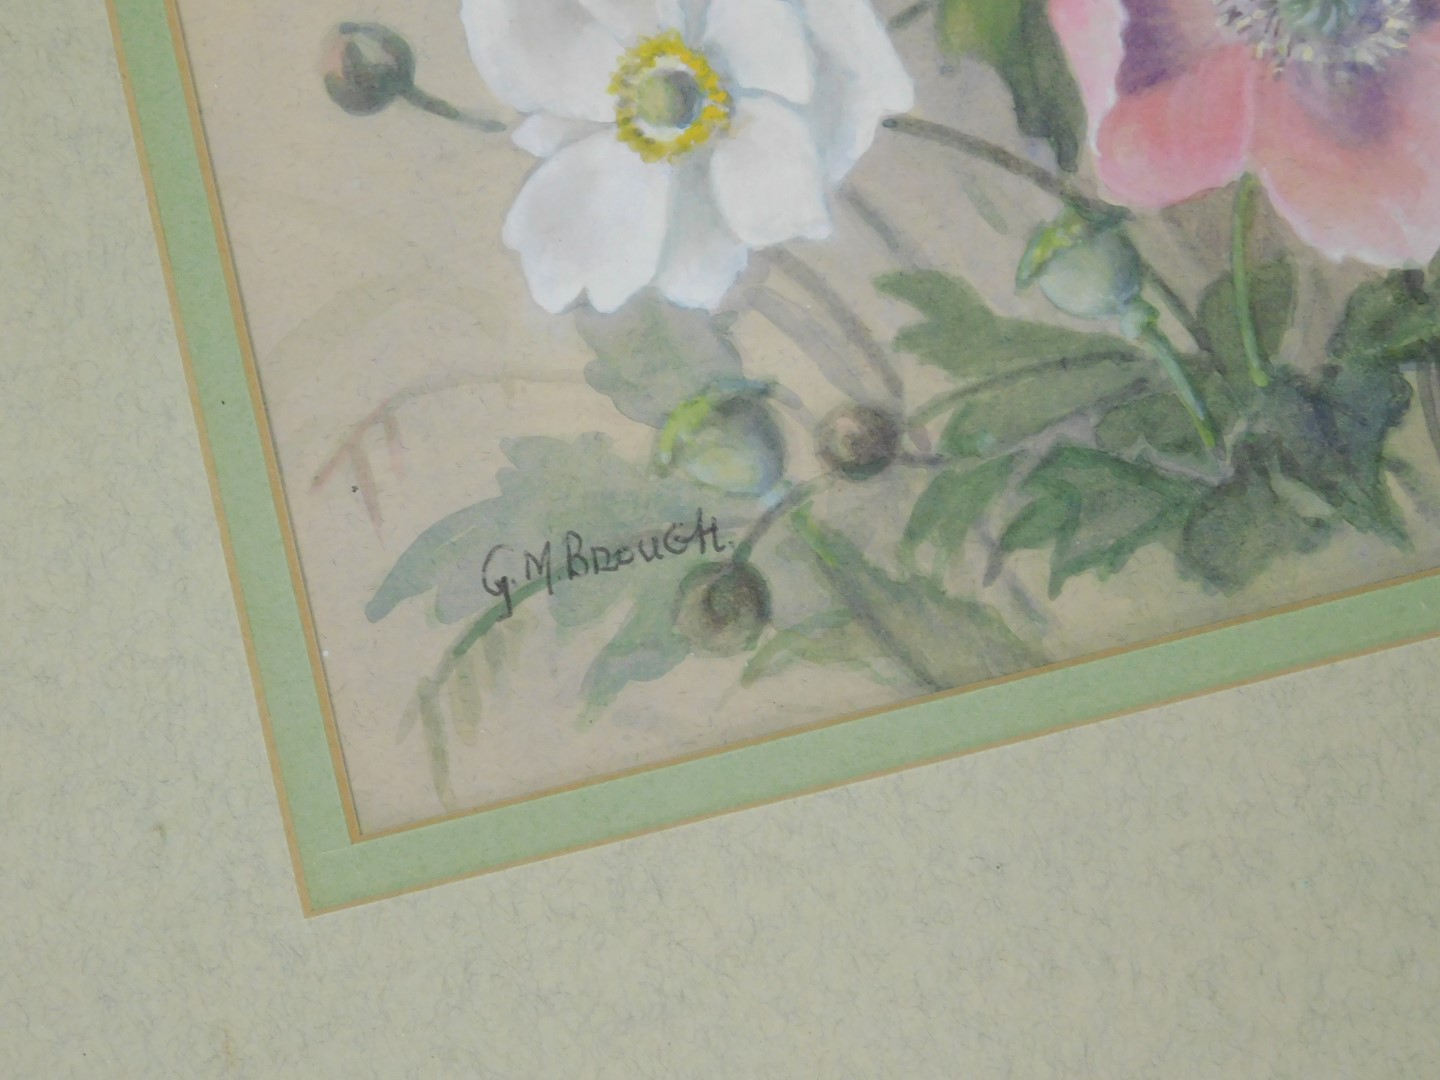 G M Brough. Four still lifes of flowers, watercolours, signed, 35cm x 24cm. - Image 5 of 9